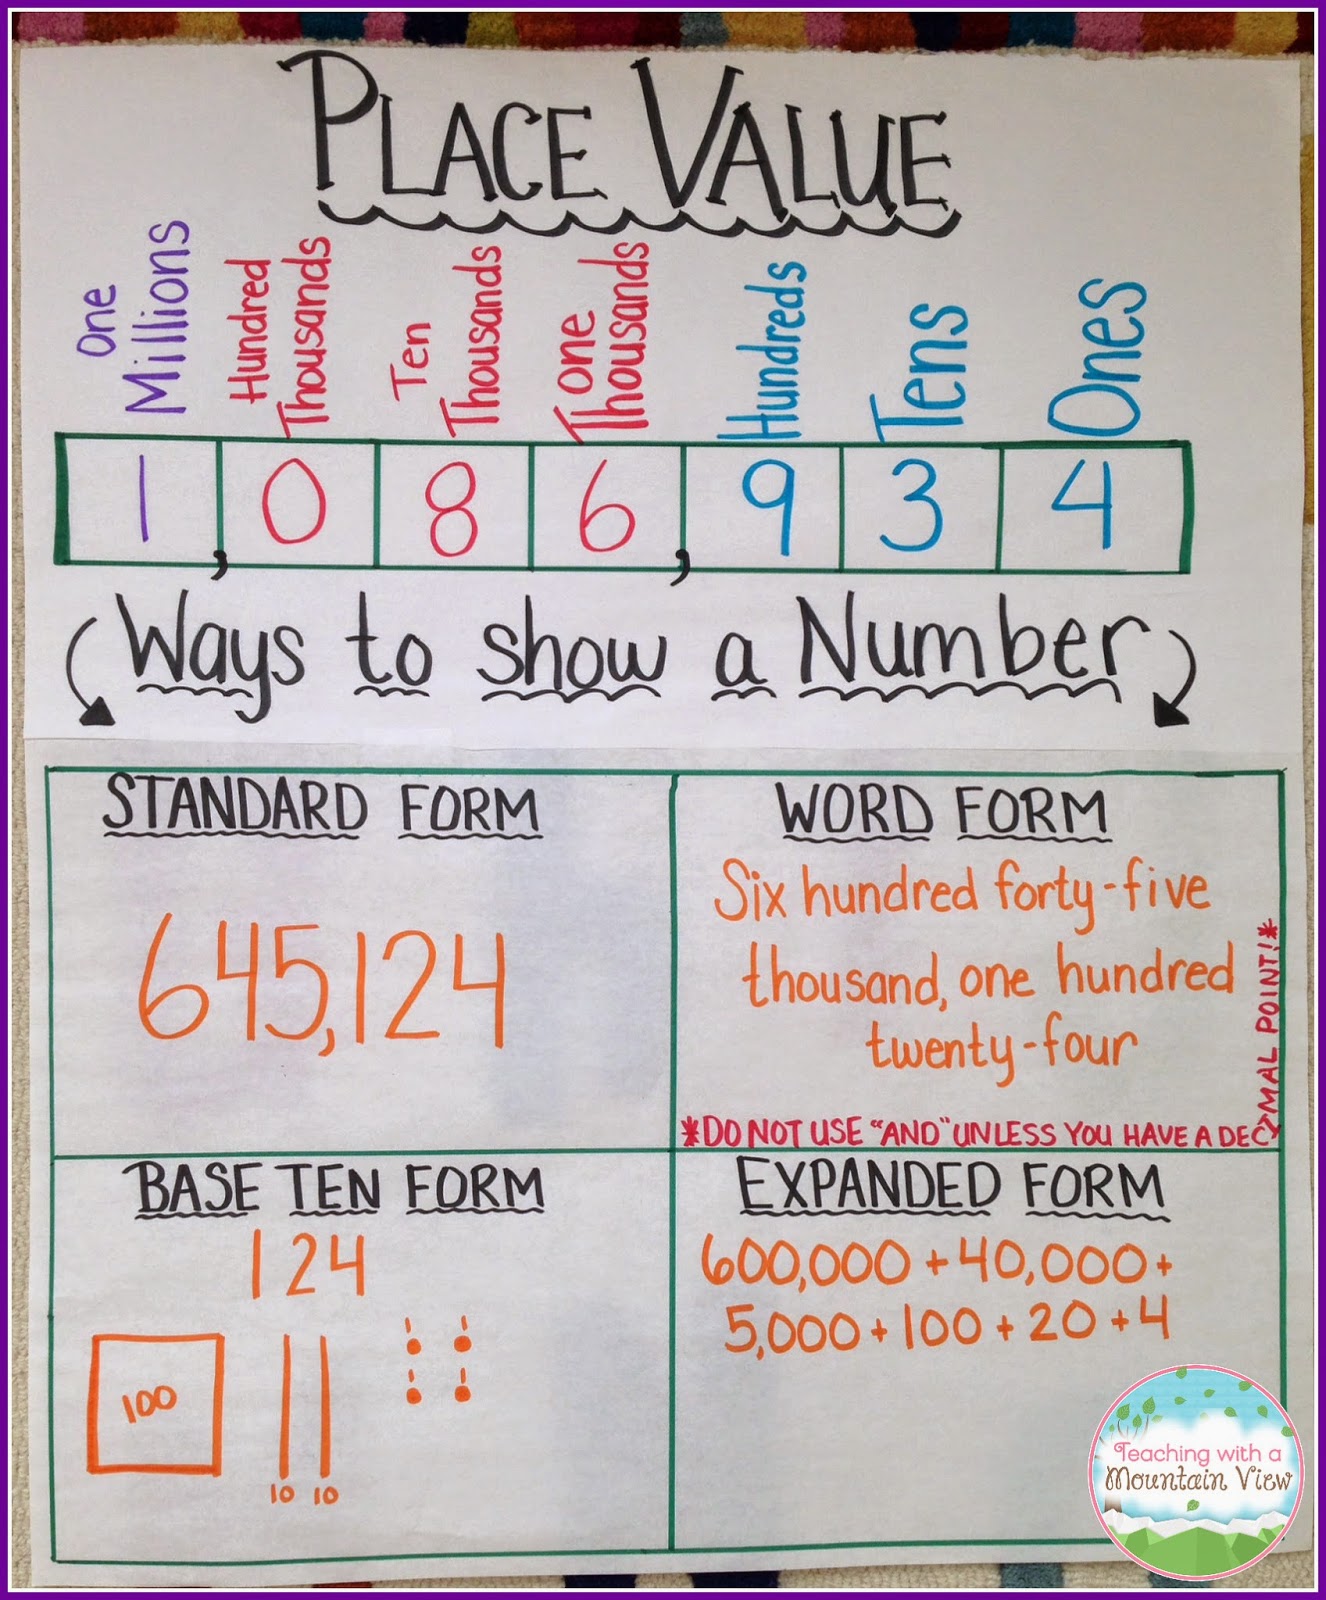 Building Place Value Understanding In The 3rd Grade Classroom SMathSmarts